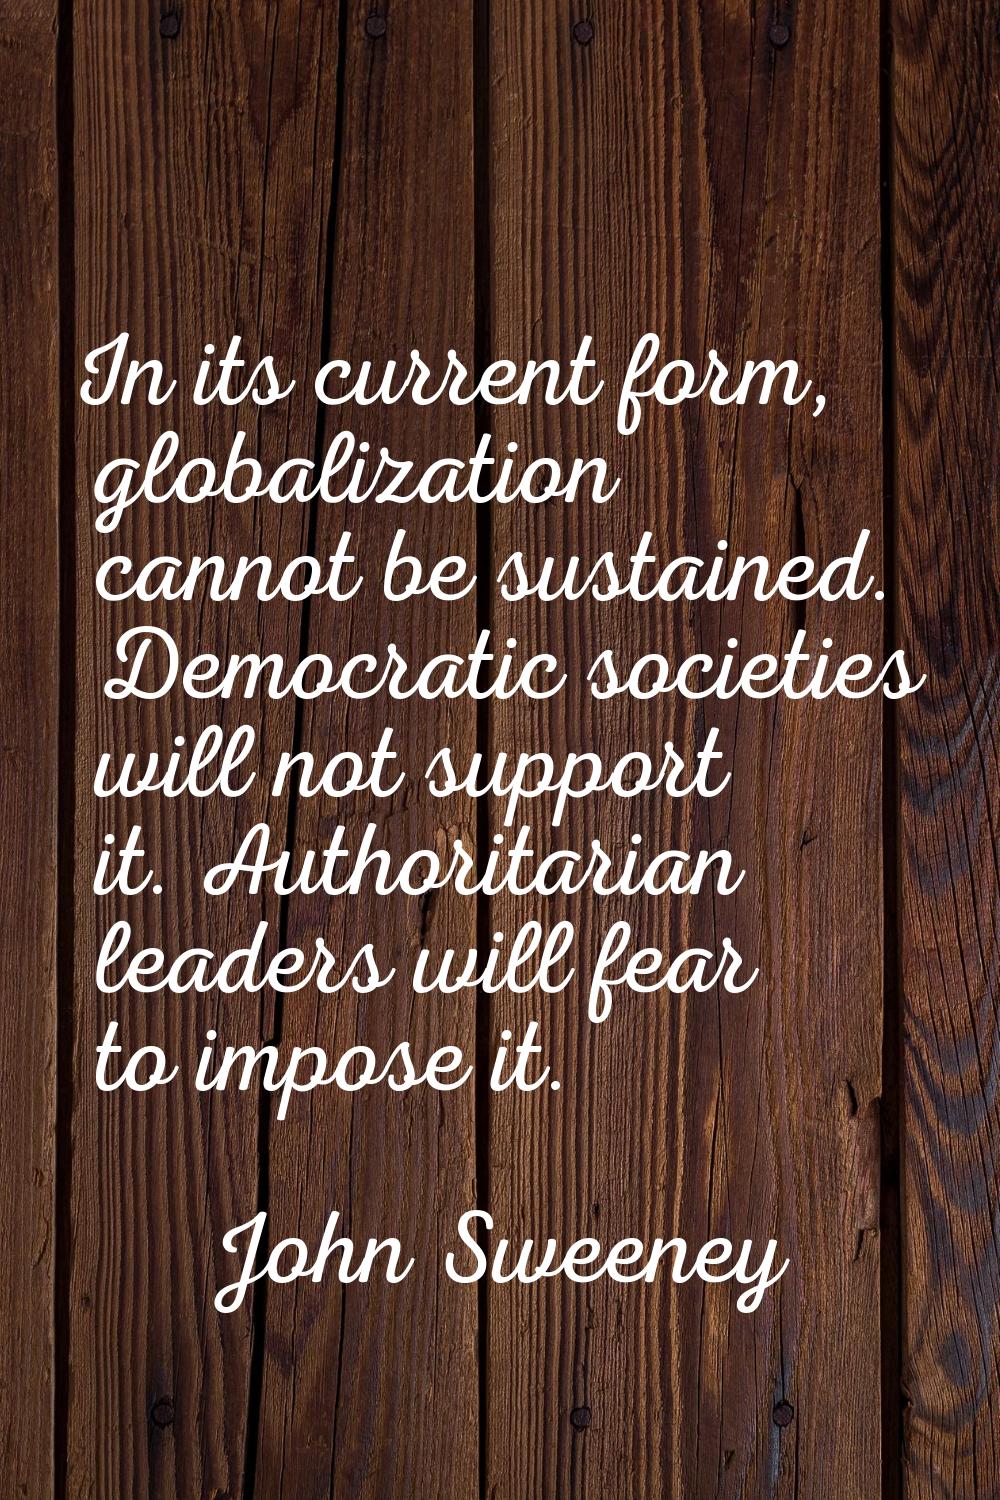 In its current form, globalization cannot be sustained. Democratic societies will not support it. A